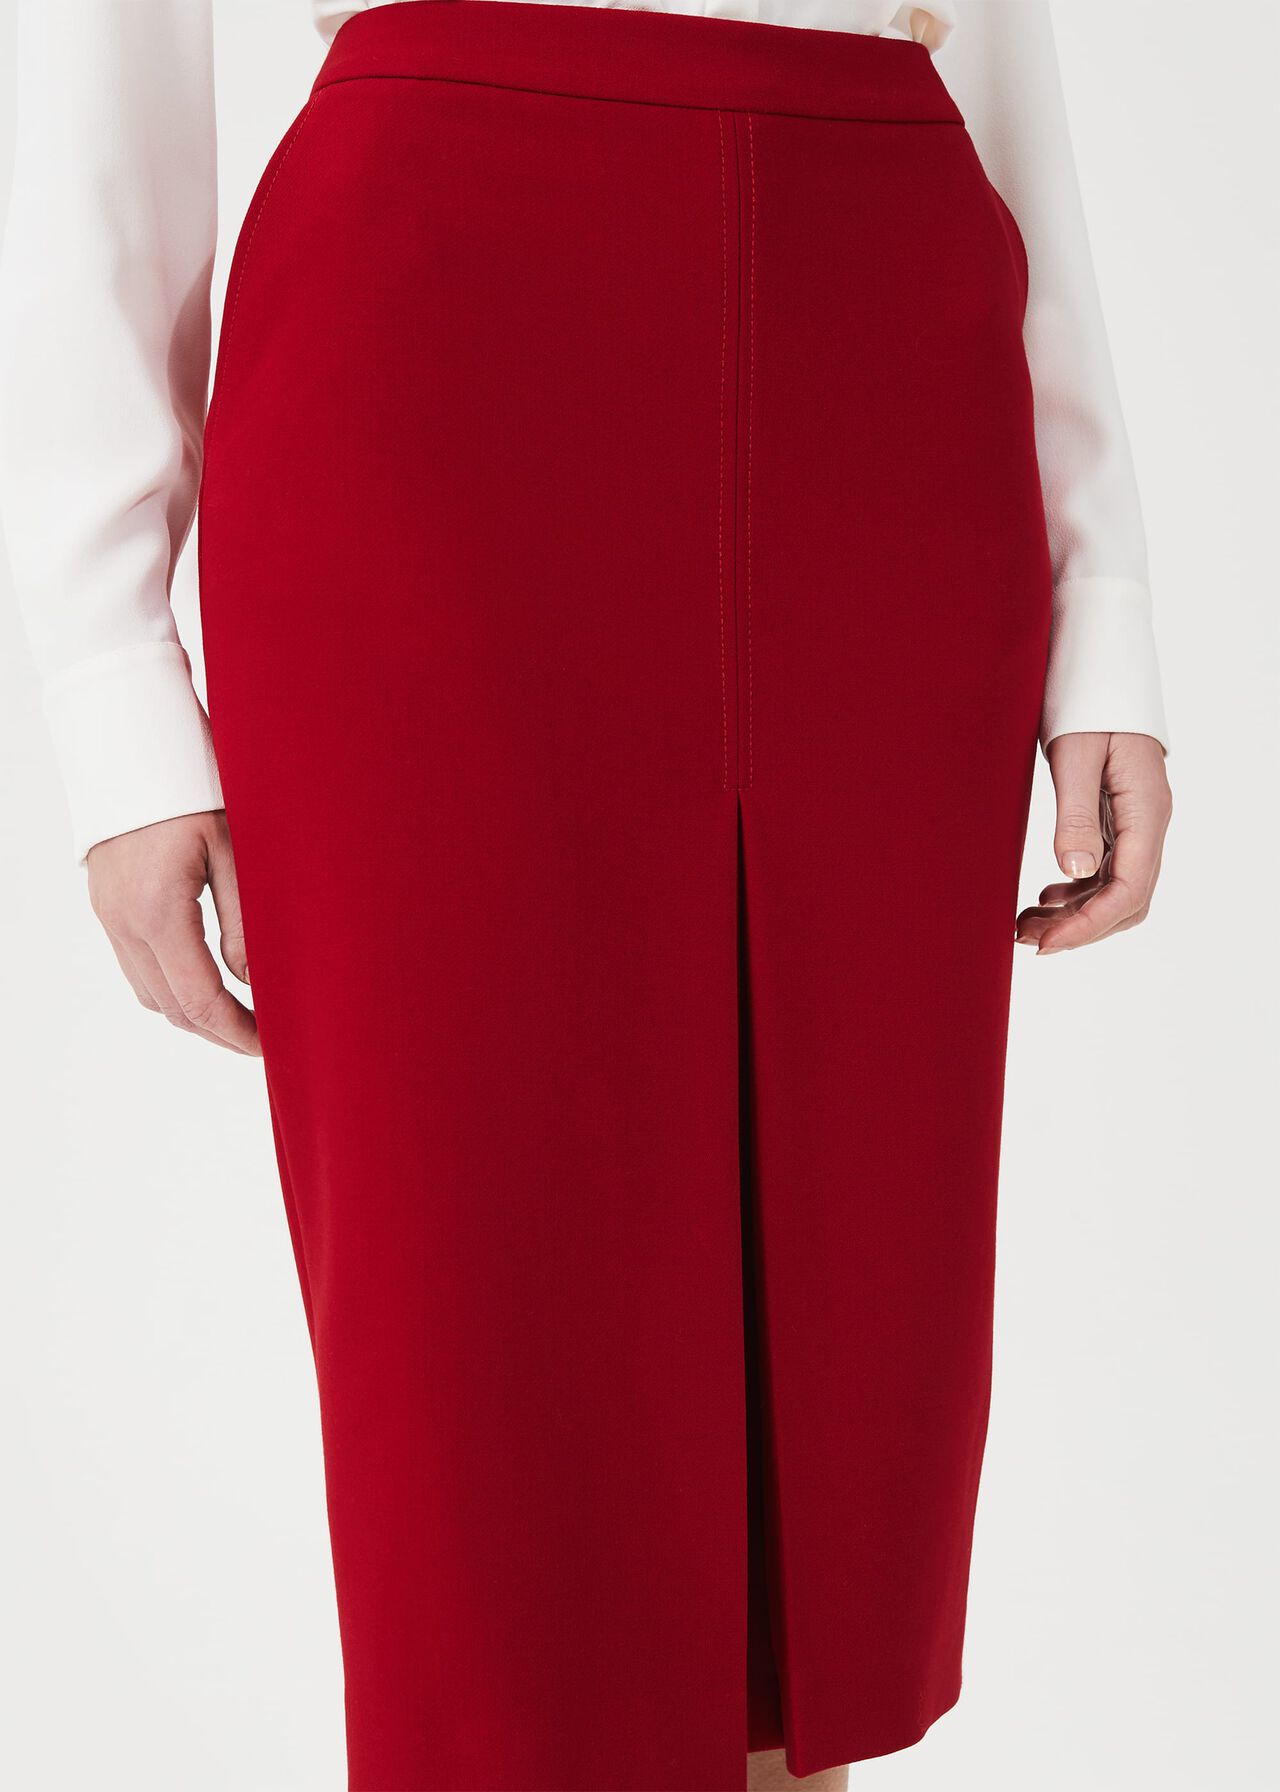 Lucille Pencil Skirt With Stretch, Red, hi-res